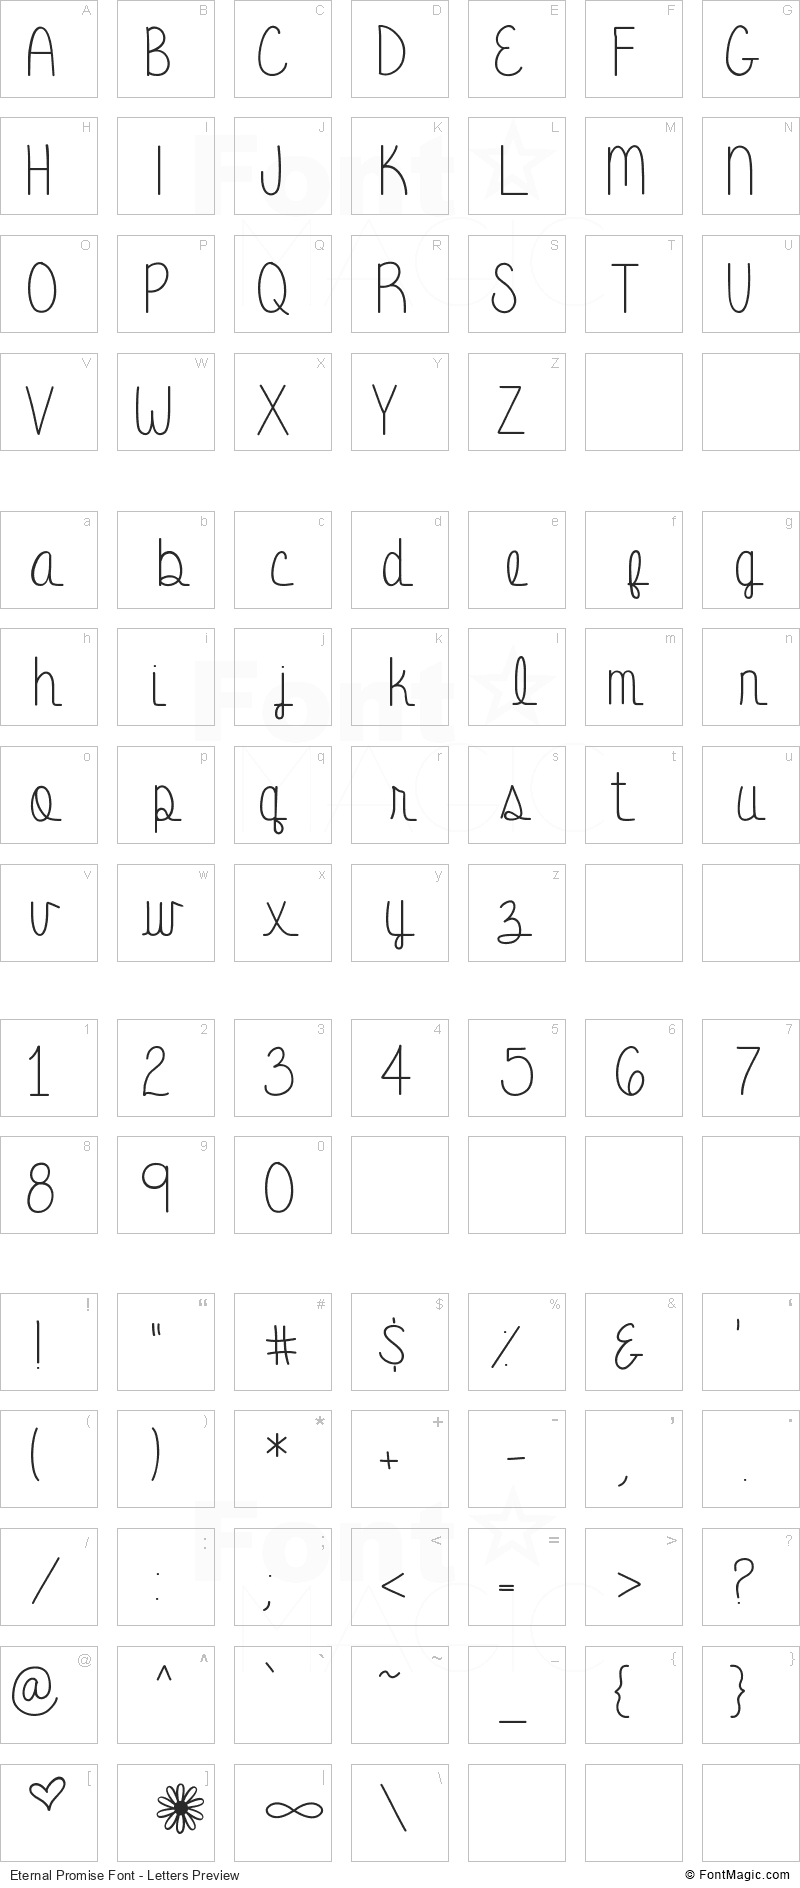 Eternal Promise Font - All Latters Preview Chart